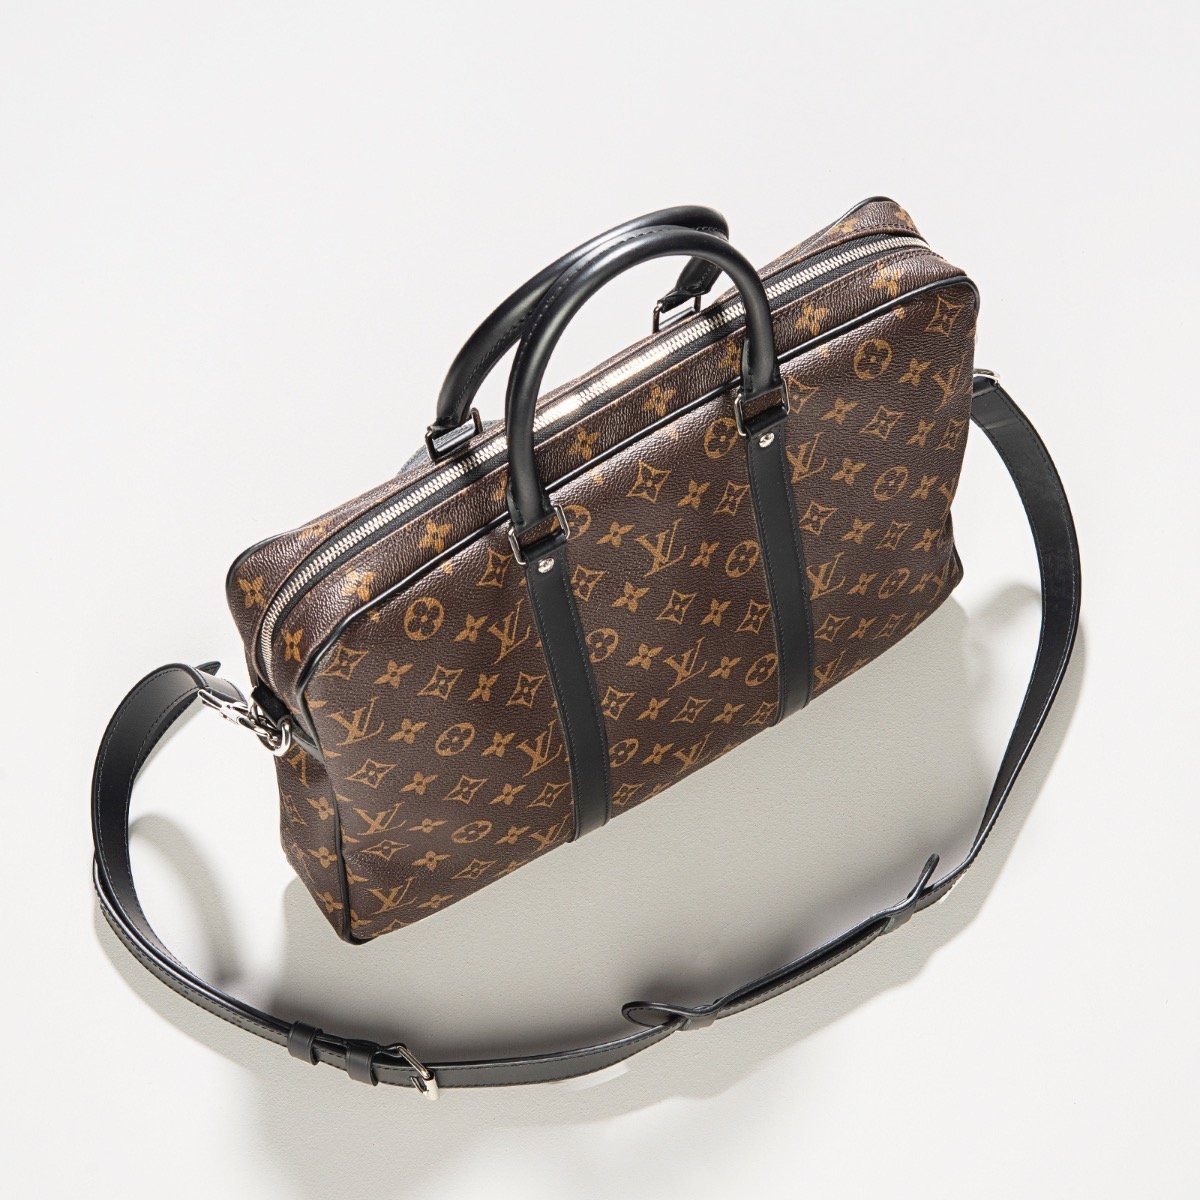 Louis Vuitton Porte-Documents Voyage PM What's in my bag